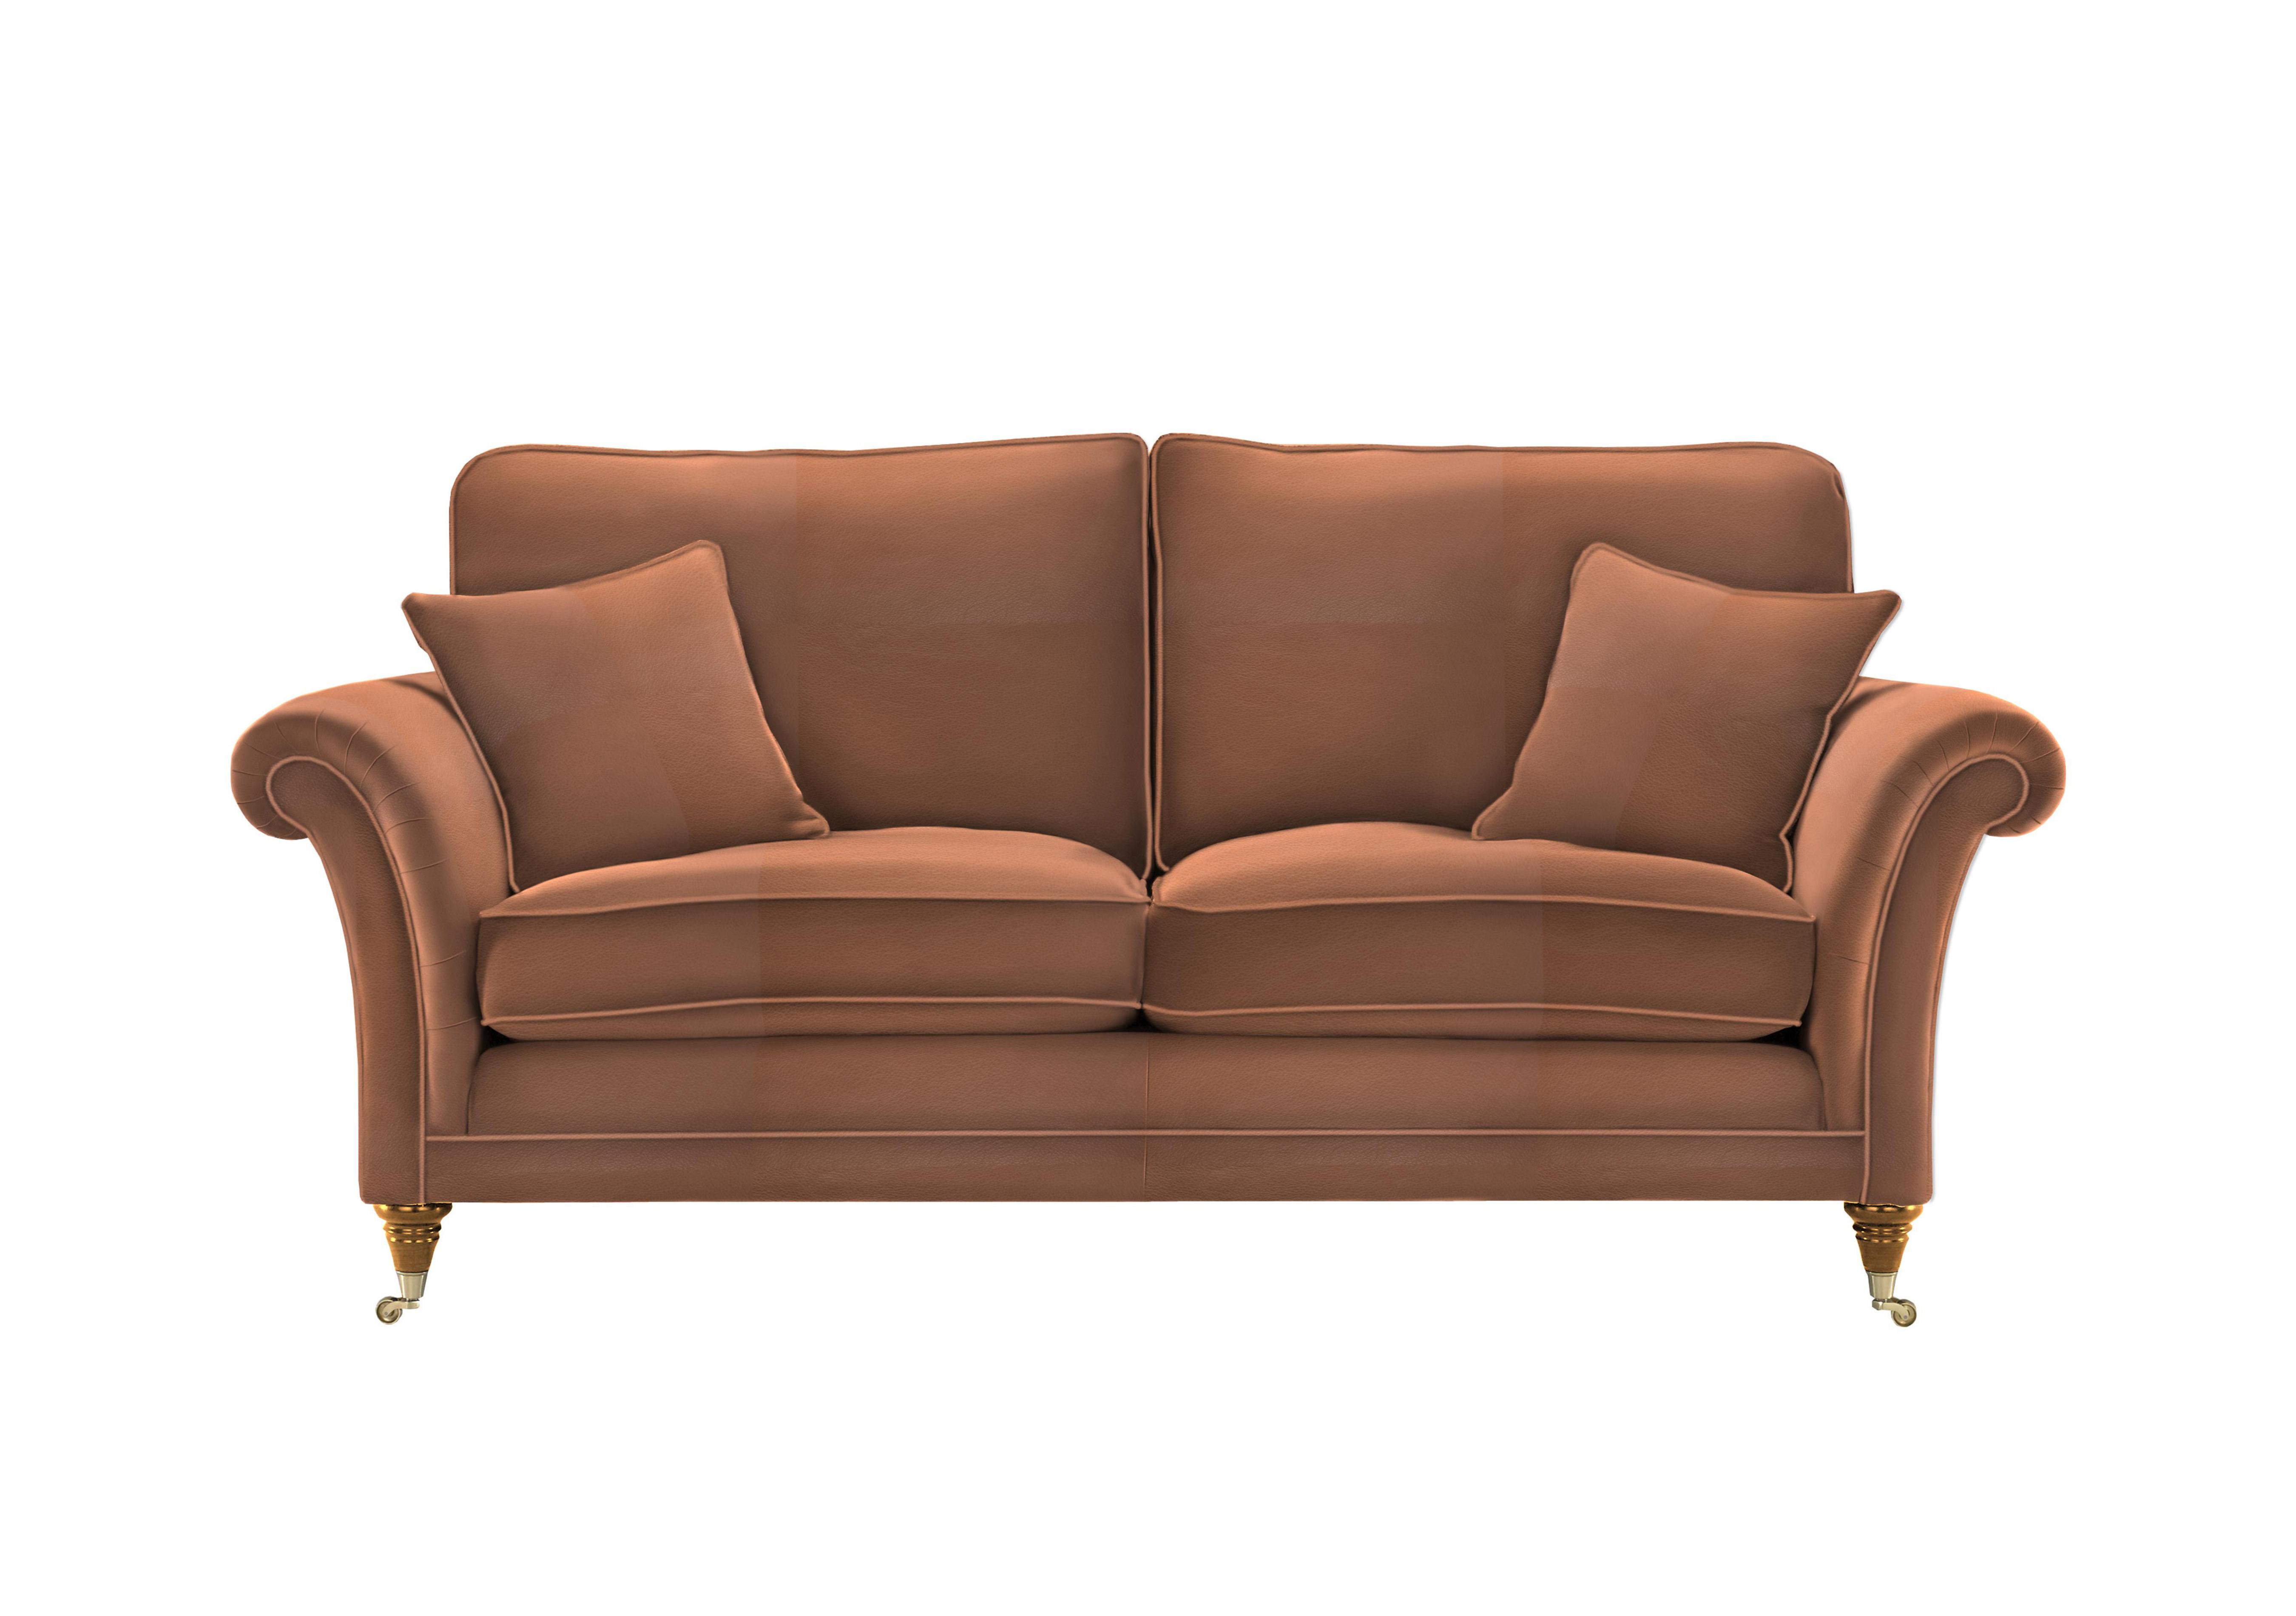 Burghley Large 2 Seater Leather Sofa in 009019-0025 Roma Nutmeg on Furniture Village